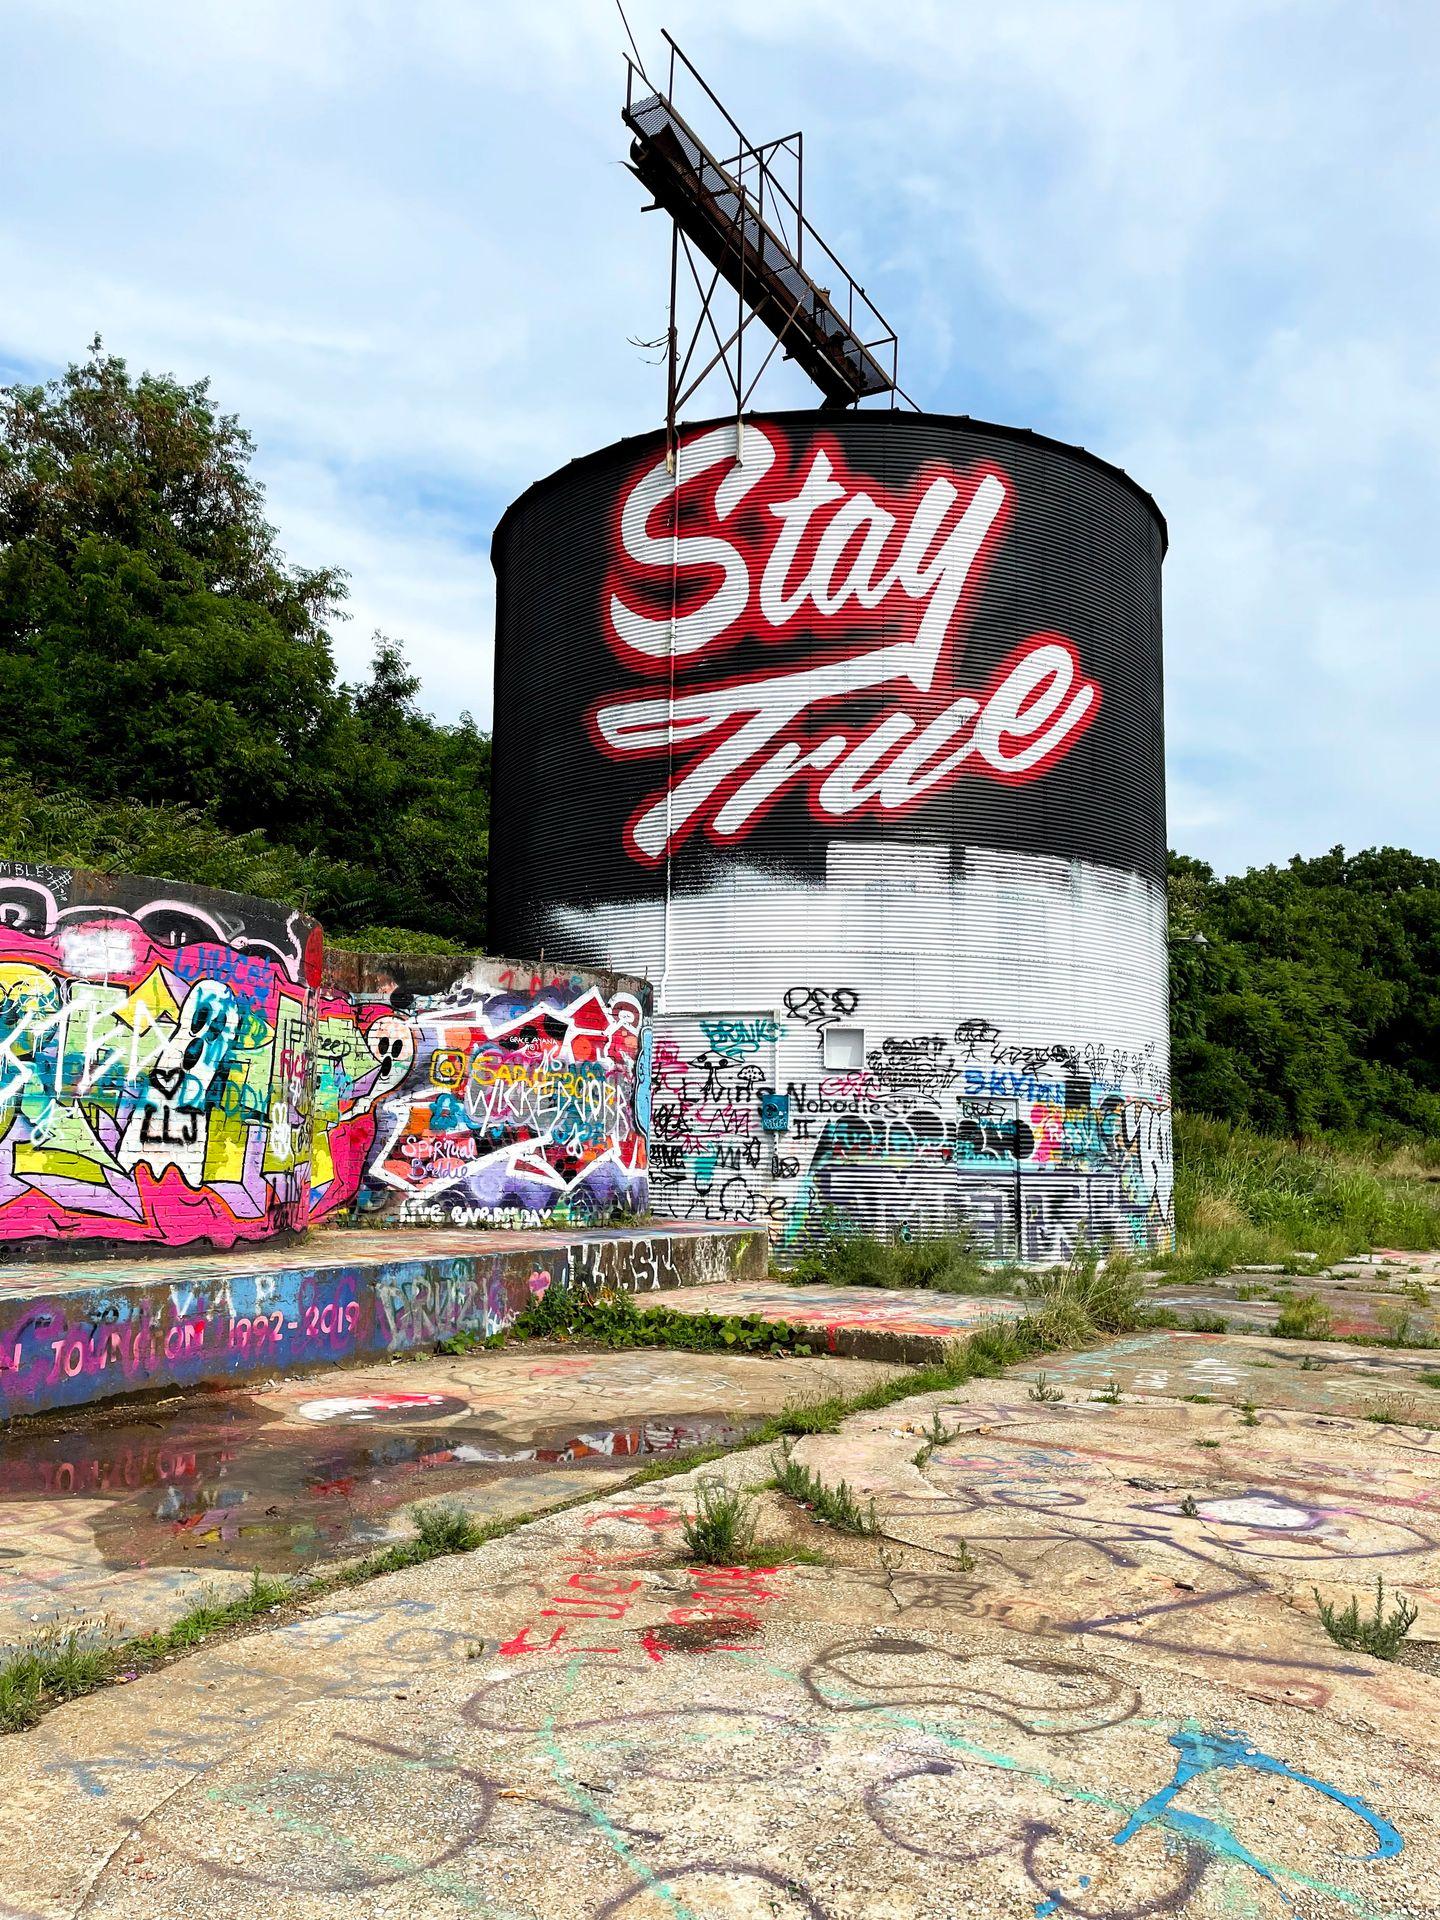 A painted water tower that reads "Stay True" in the River Arts District.